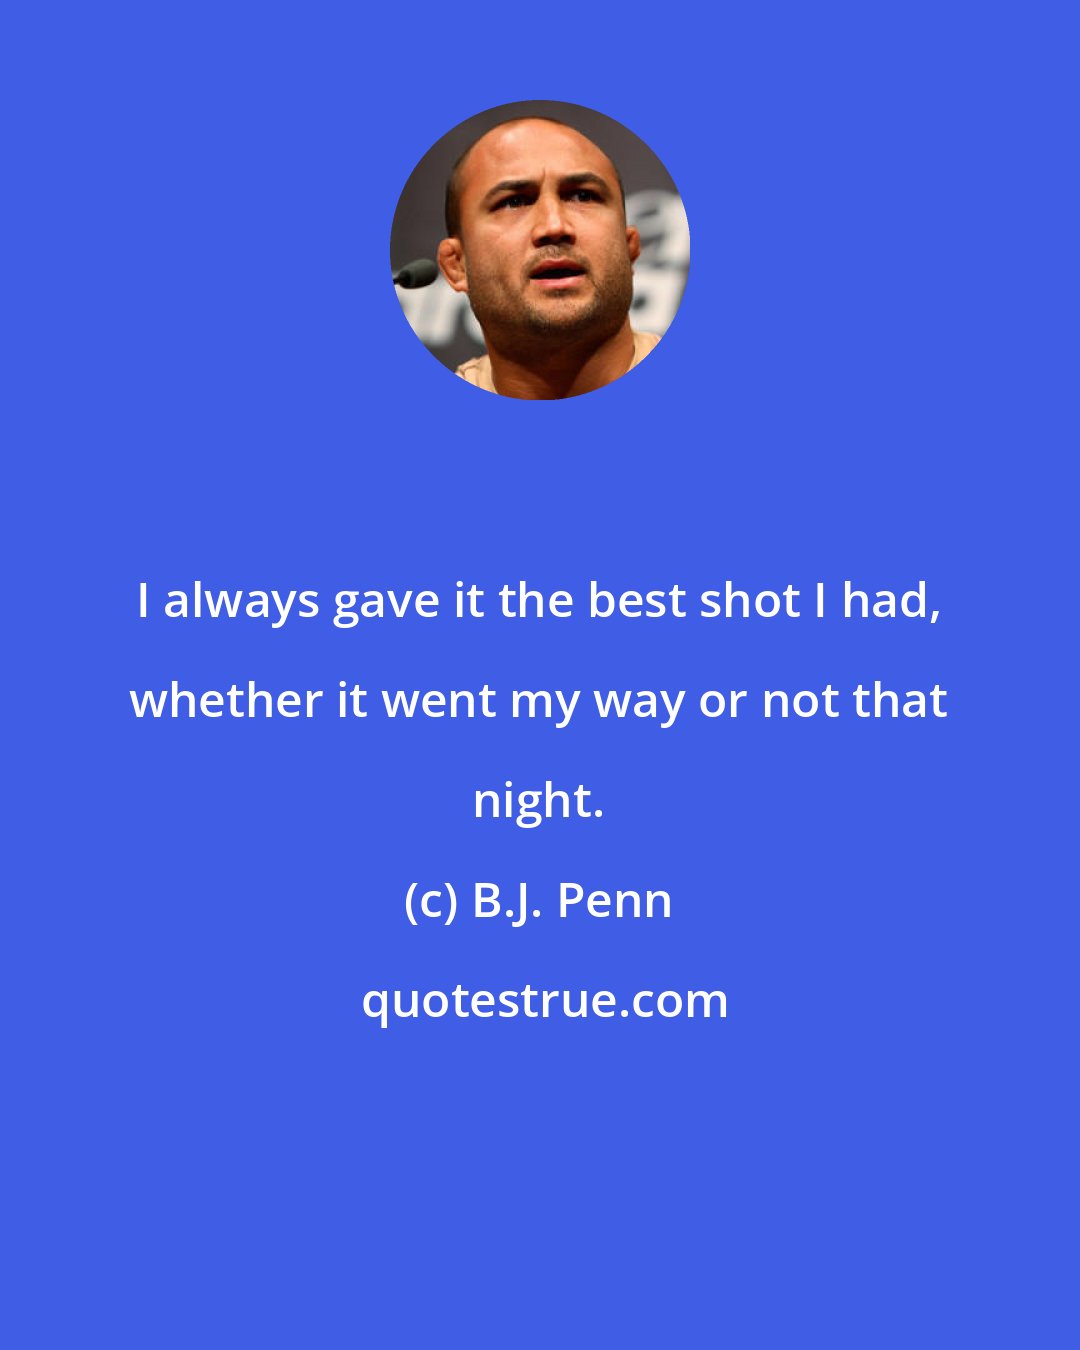 B.J. Penn: I always gave it the best shot I had, whether it went my way or not that night.